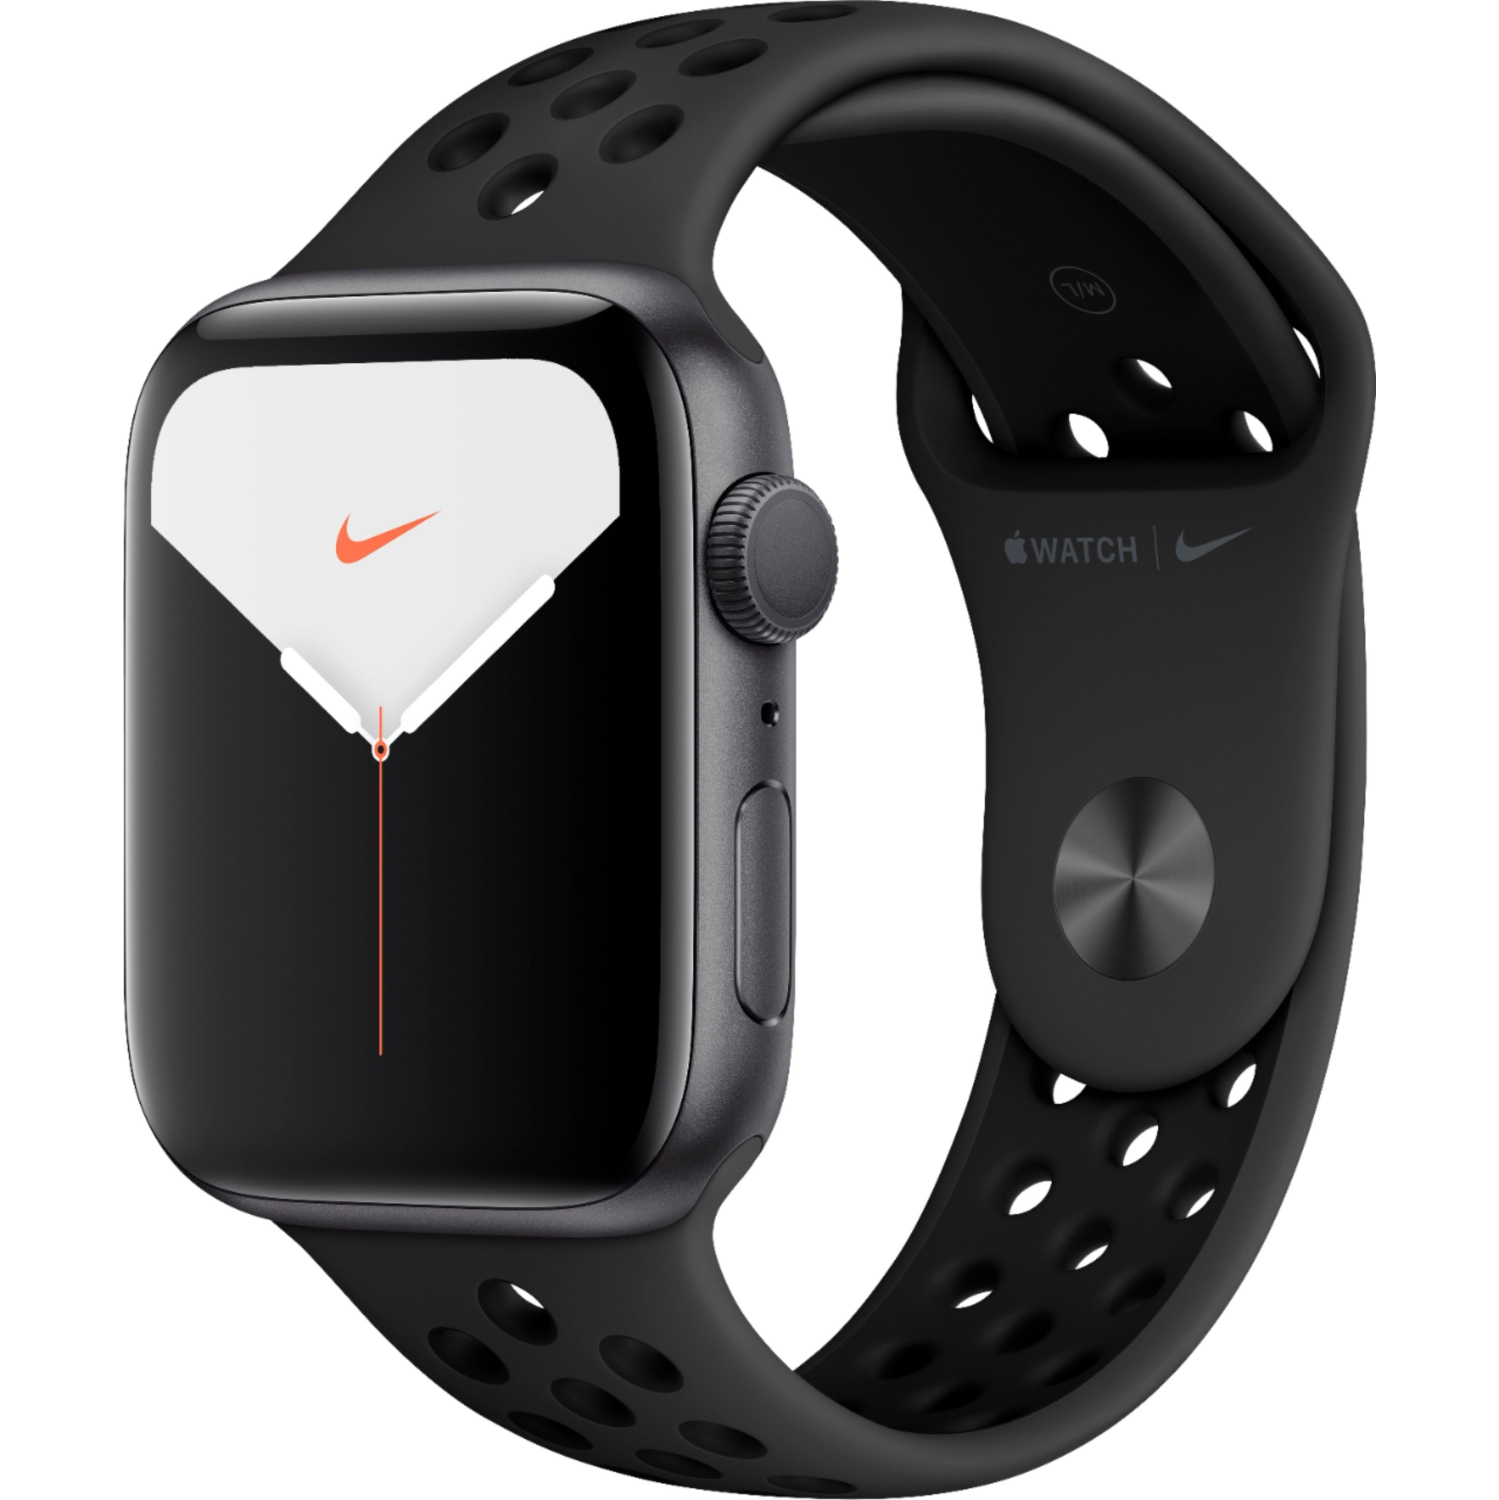 Refurbished (Good) - Apple Watch Nike Series 5 (GPS+Cellular) 44mm Space Grey Aluminum Case w/ Anthracite/Black Nike Sport Band